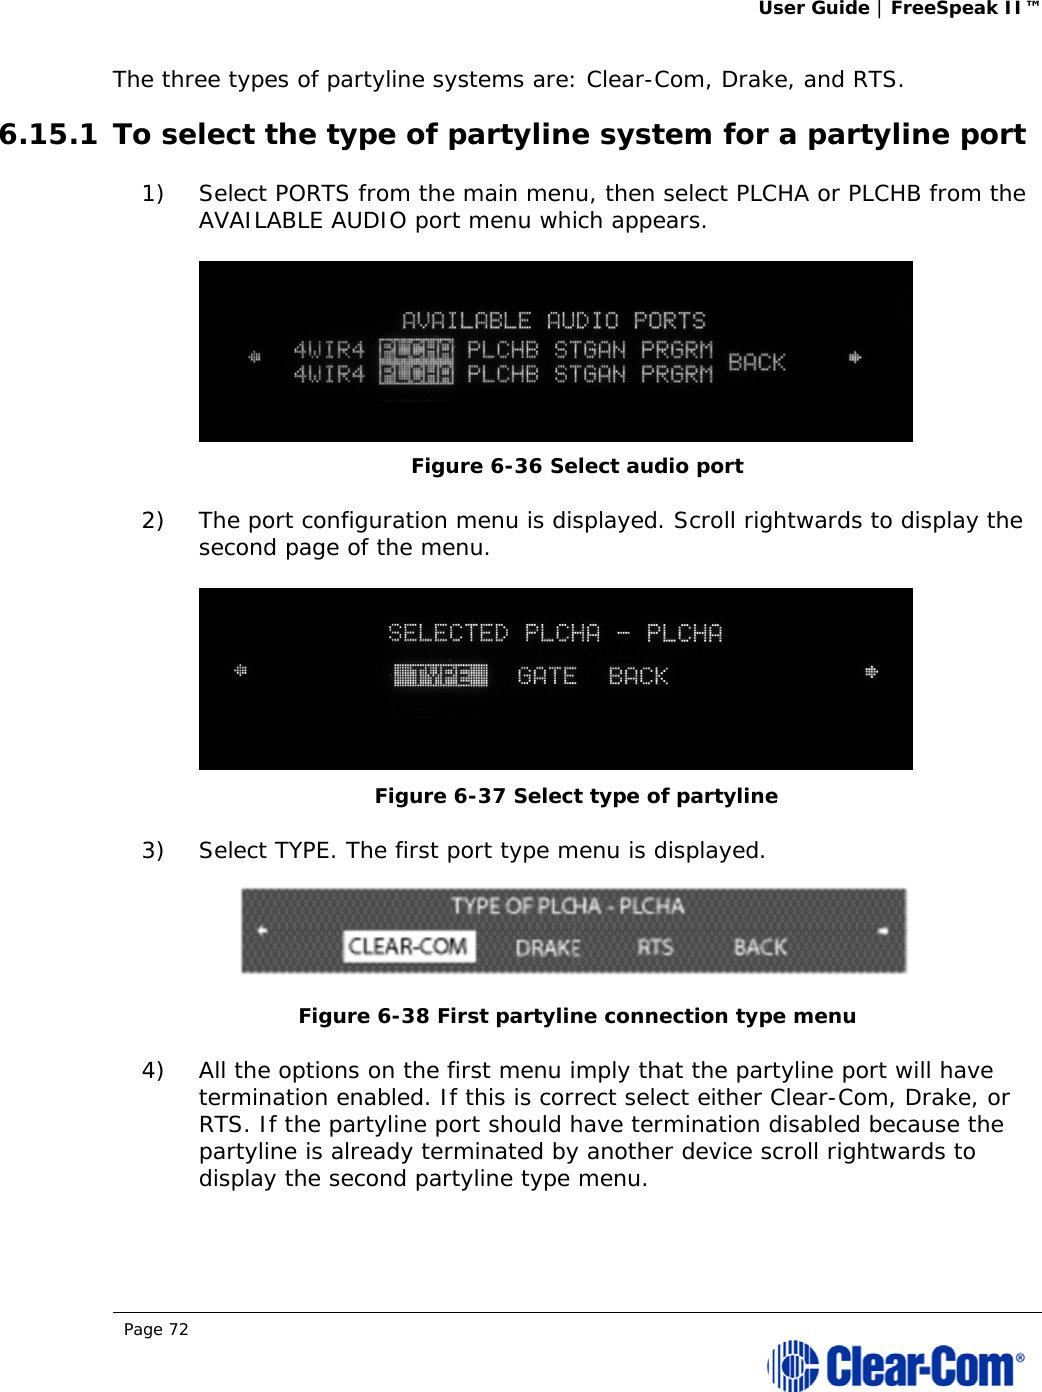 User Guide | FreeSpeak II™  Page 72  The three types of partyline systems are: Clear-Com, Drake, and RTS.  6.15.1 To select the type of partyline system for a partyline port 1) Select PORTS from the main menu, then select PLCHA or PLCHB from the AVAILABLE AUDIO port menu which appears.  Figure 6-36 Select audio port 2) The port configuration menu is displayed. Scroll rightwards to display the second page of the menu.  Figure 6-37 Select type of partyline  3) Select TYPE. The first port type menu is displayed.  Figure 6-38 First partyline connection type menu 4) All the options on the first menu imply that the partyline port will have termination enabled. If this is correct select either Clear-Com, Drake, or RTS. If the partyline port should have termination disabled because the partyline is already terminated by another device scroll rightwards to display the second partyline type menu. 